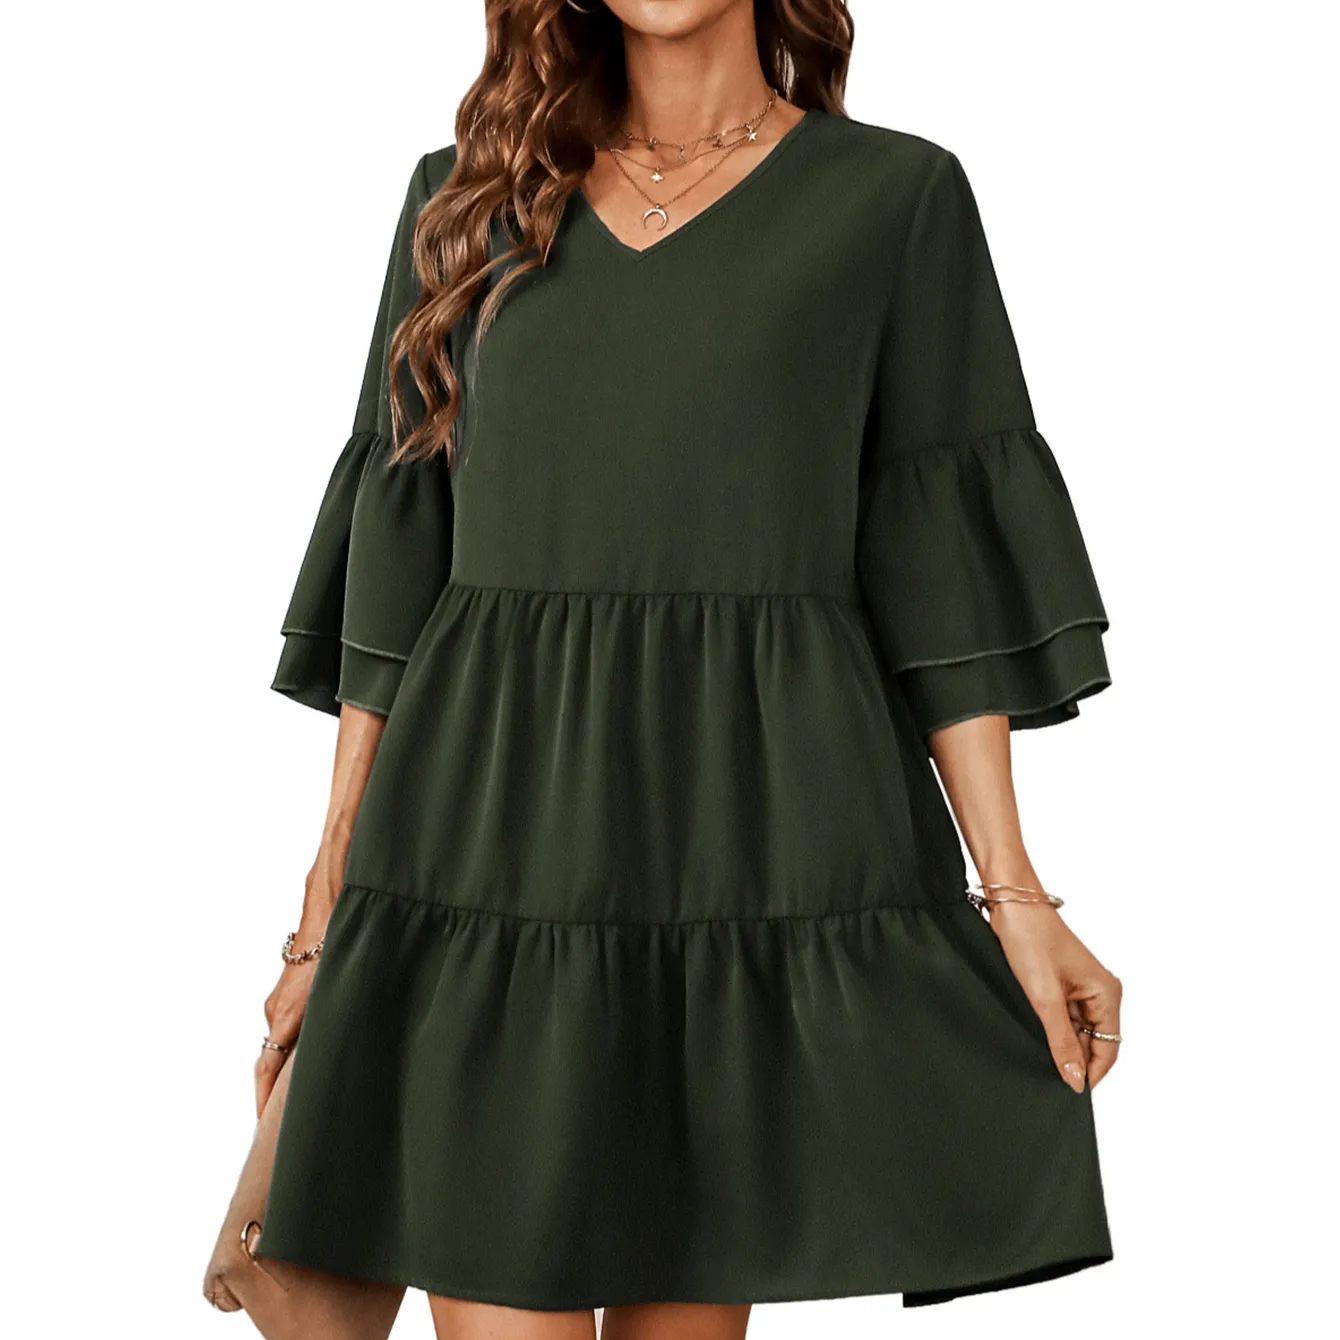 Hot sale new style short sleeve loose gather hem outfit women ruffled casual mini dress for summer